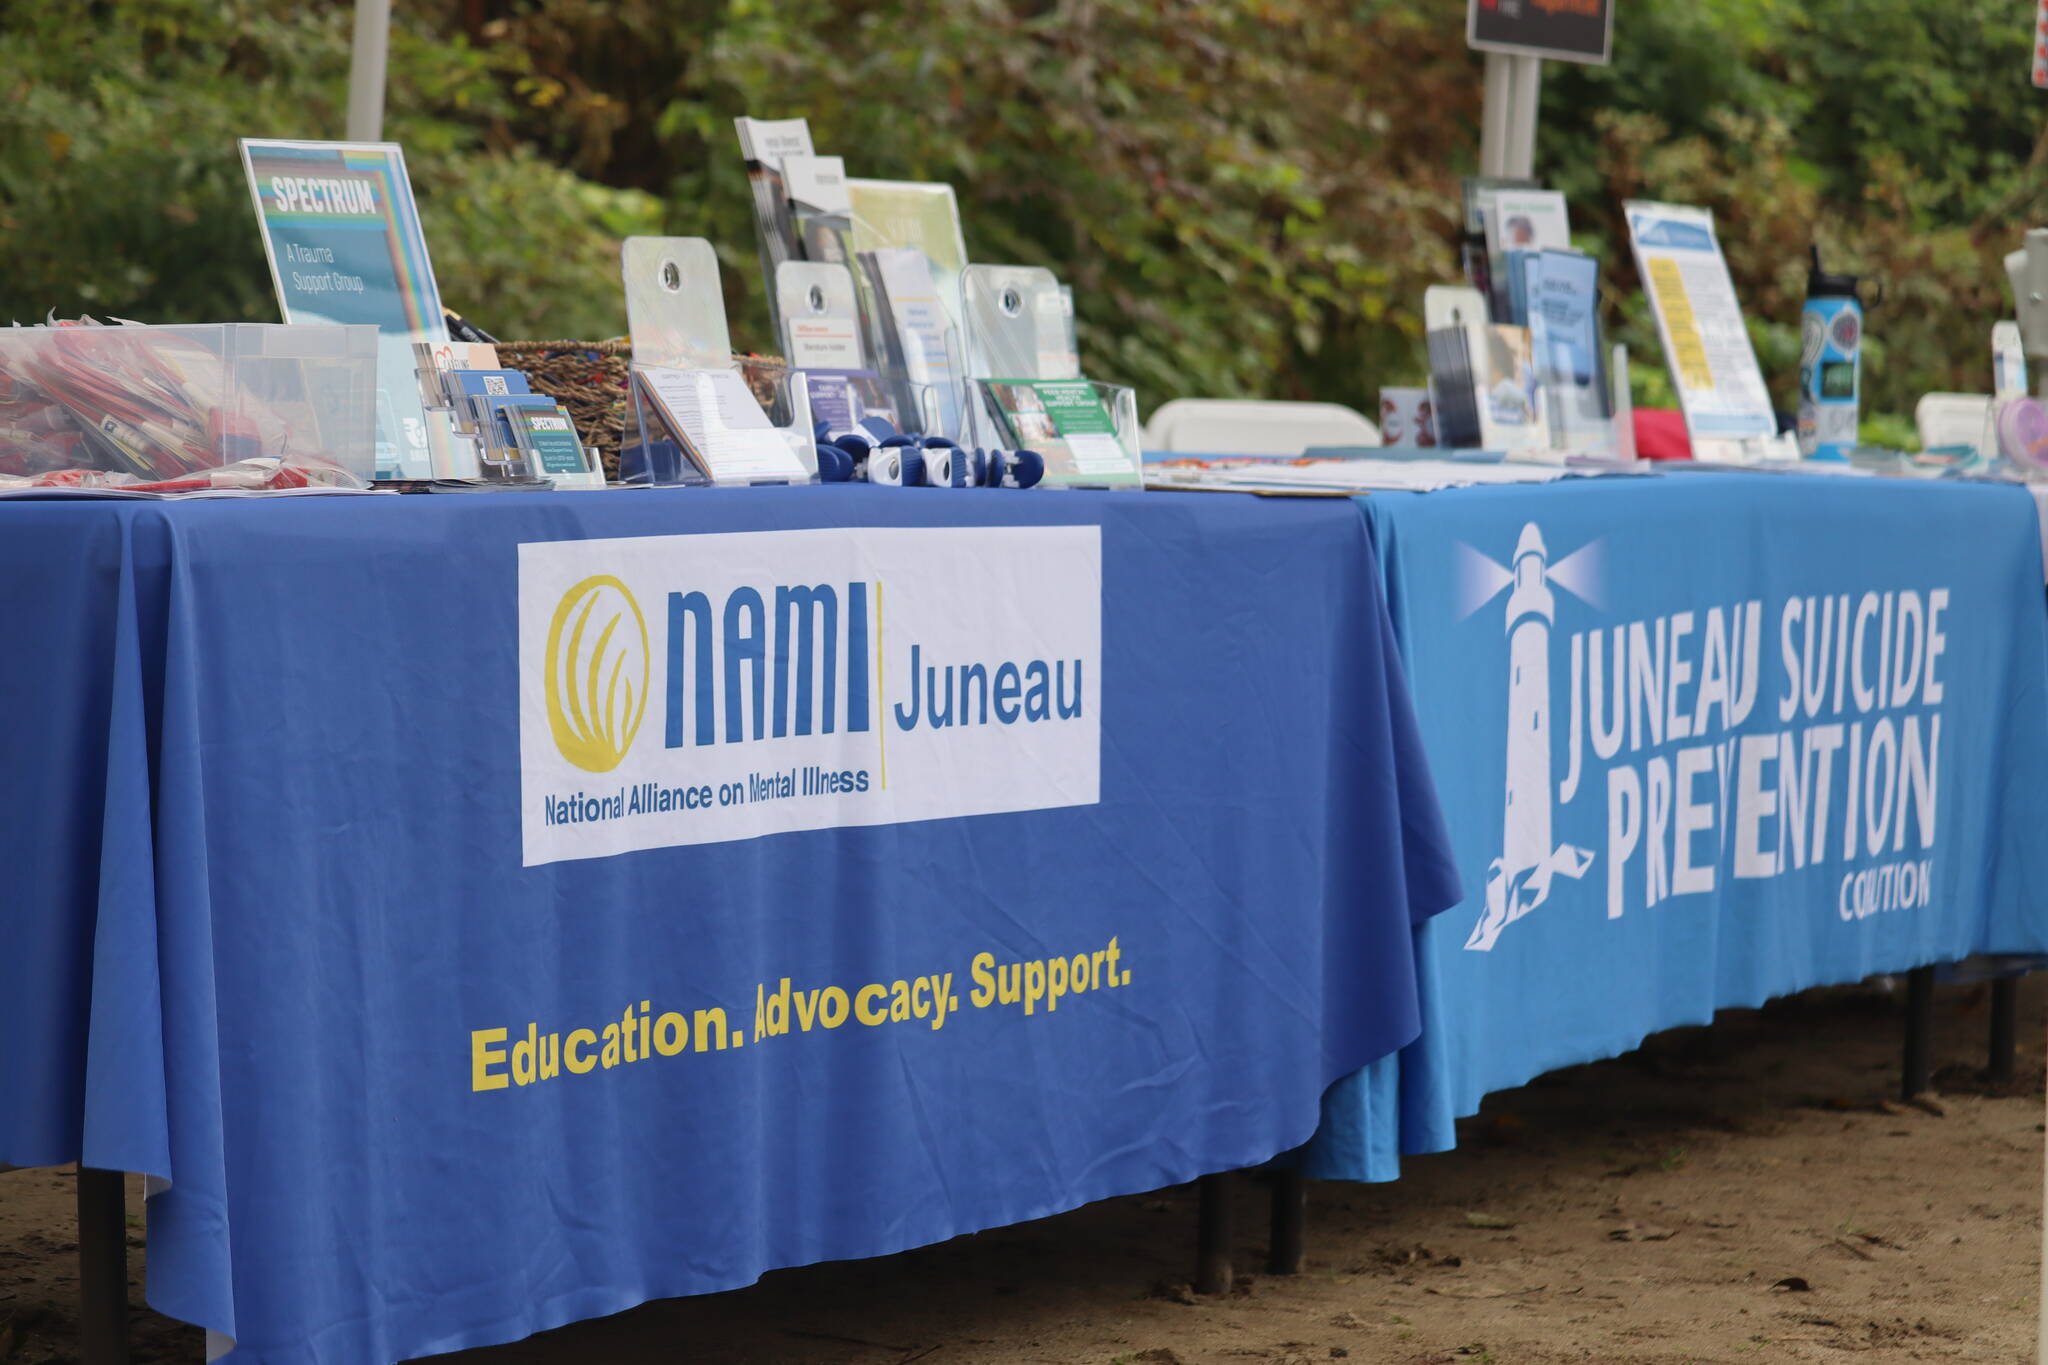 Juneau Suicide Prevention Coalition and National Alliance on Mental Illness (NAMI) Juneau hosted a Community BBQ at Sandy Beach on Saturday, Sept. 10. in recognition of International Suicide Prevention Awareness Day. (Jonson Kuhn / Juneau Empire)